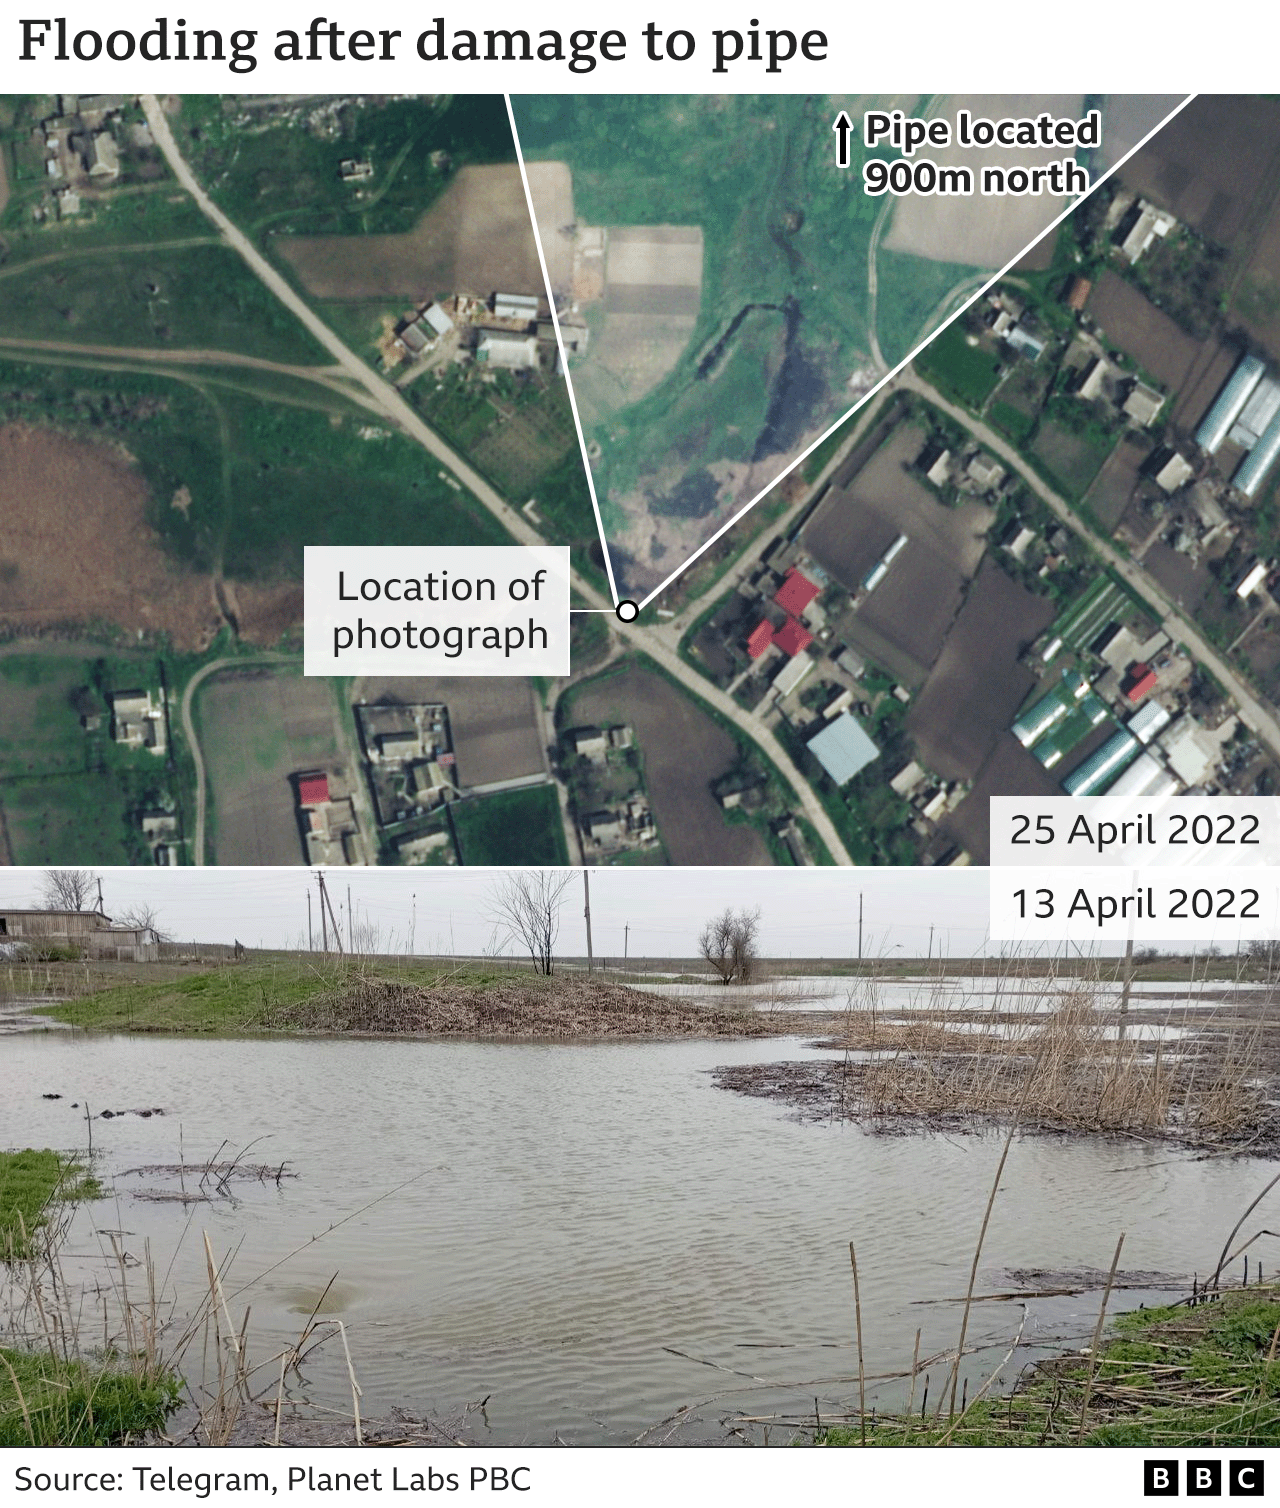 An image showing a flooded area